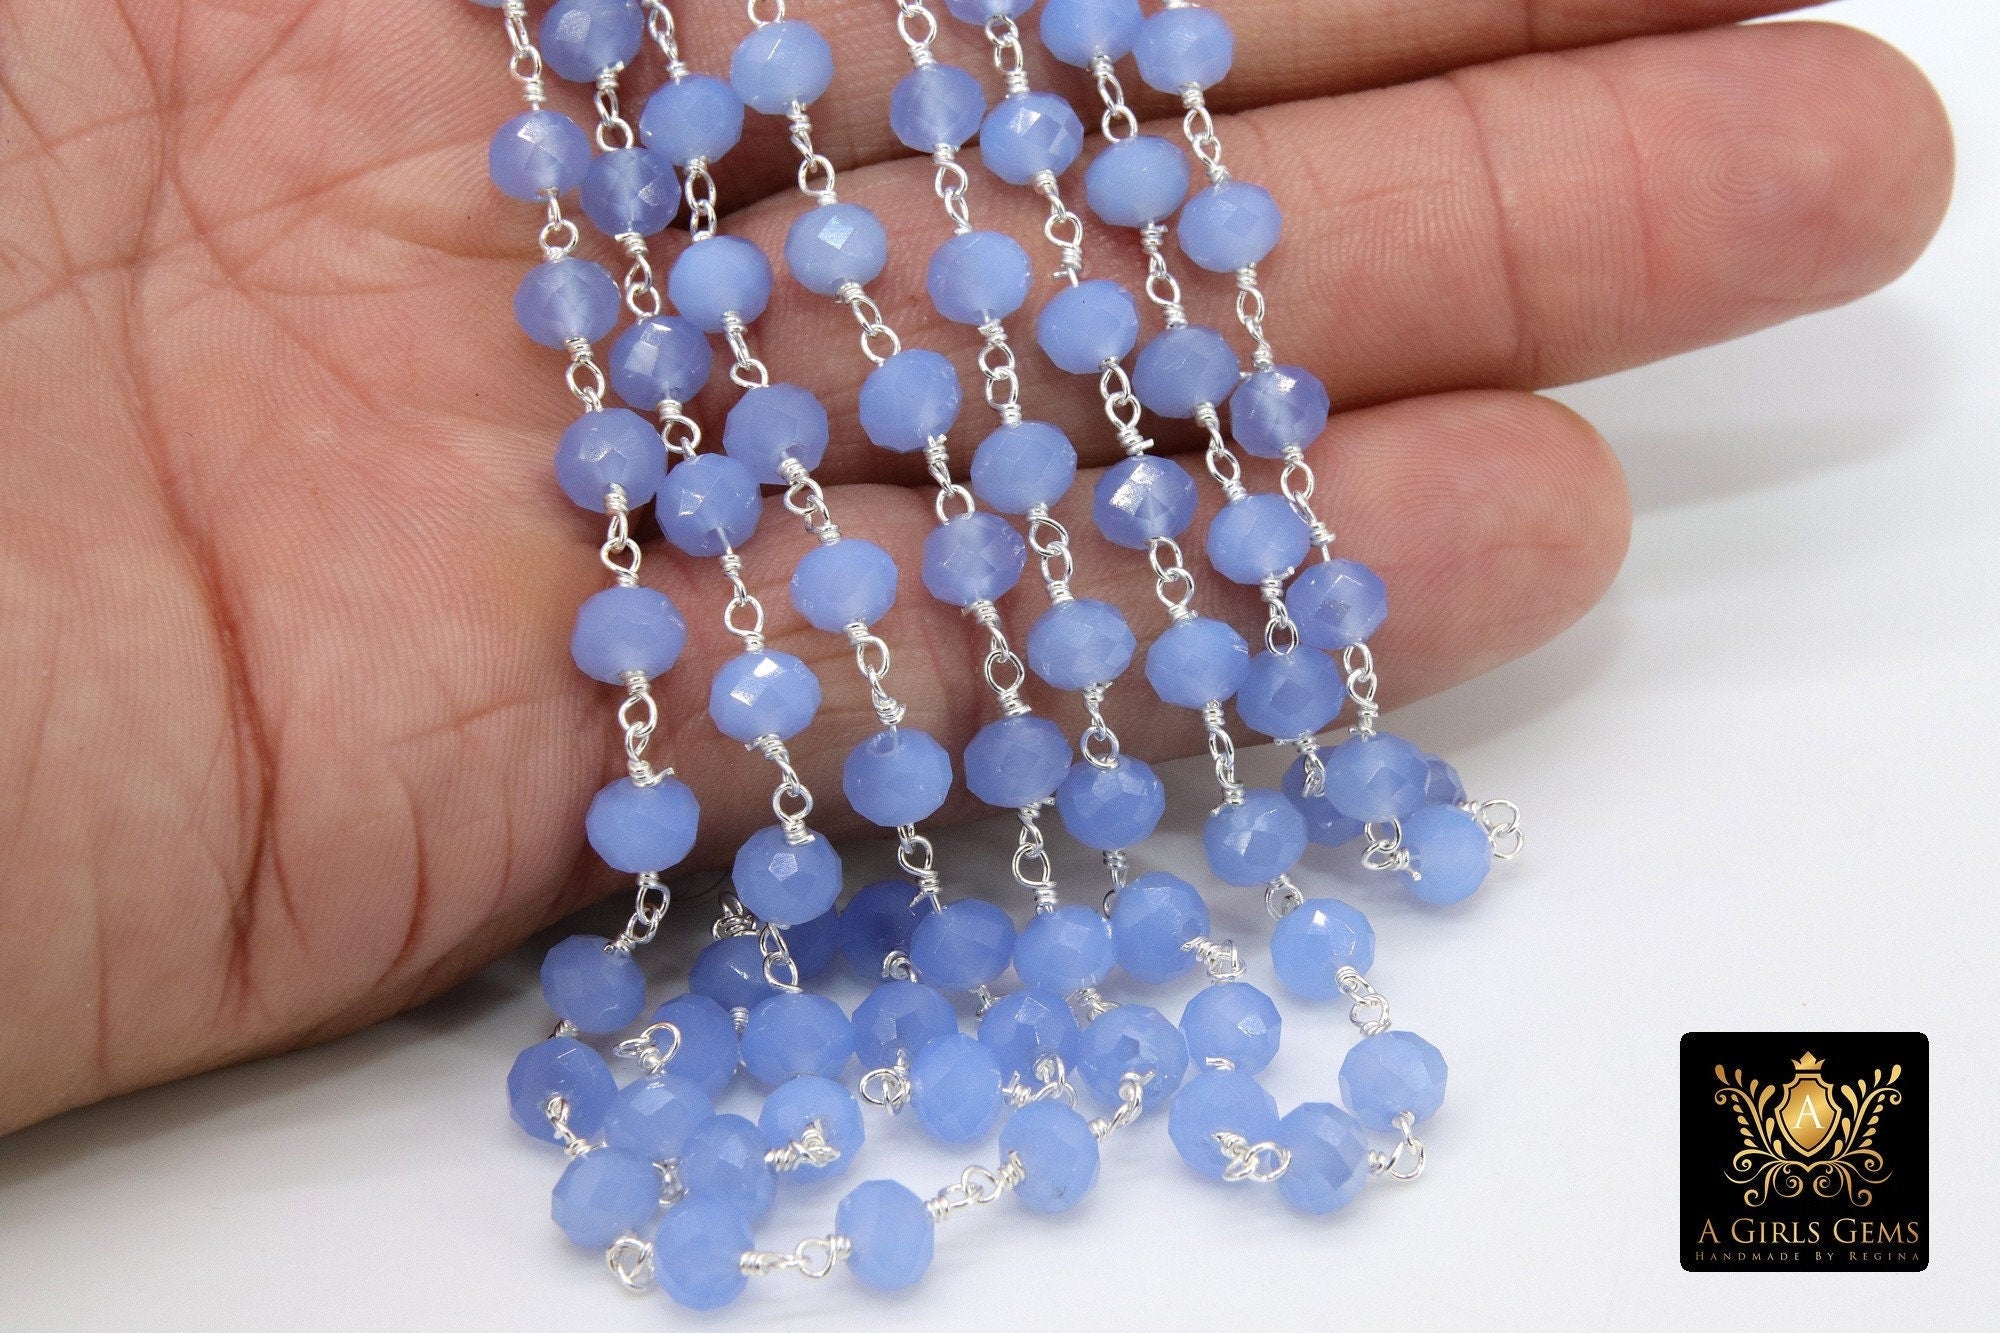 Baby Blue Chalcedony AB Rosary Chain, 6 mm Gold Wire Wrapped Crystal Jewelry Beads CH #513, Unfinished Bulk Wholesale Powder Blue Bead